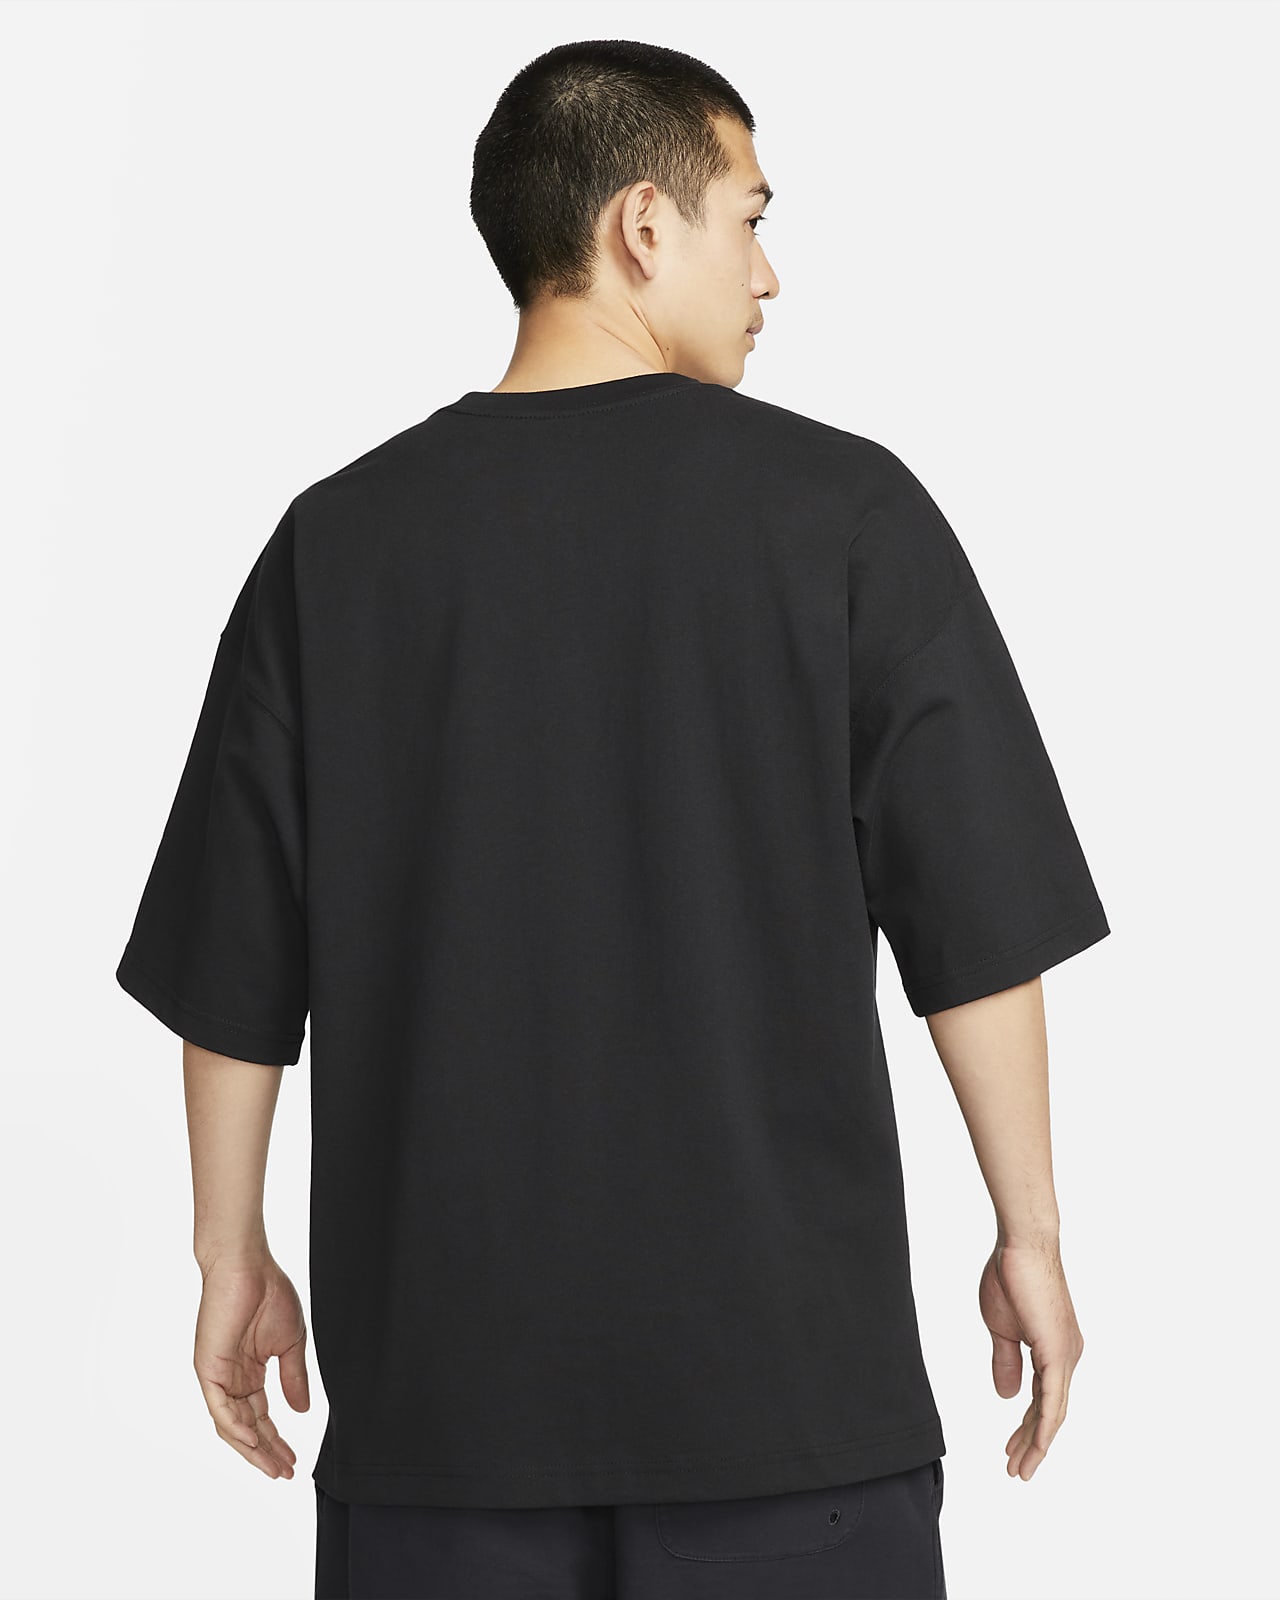 Oversized T-Shirts, Oversized Tops & Baggy T-Shirts